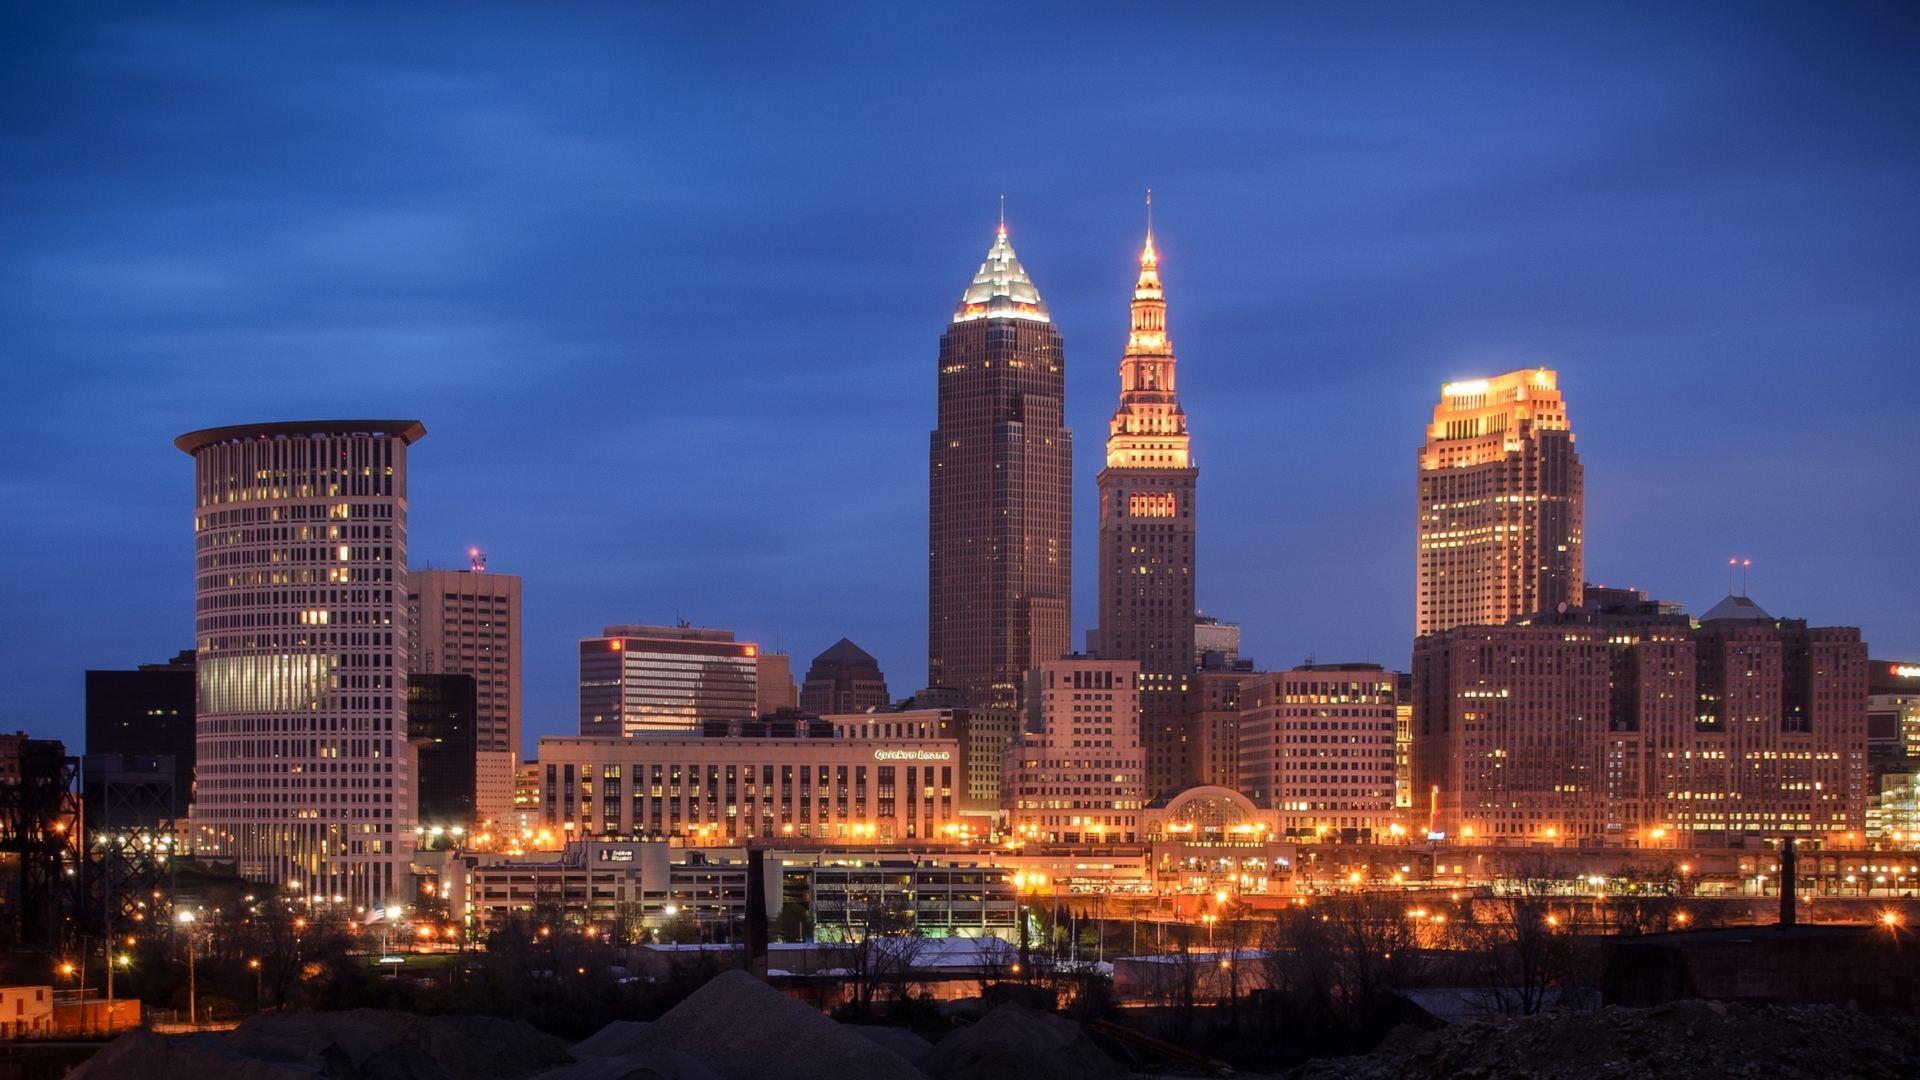 Cleveland Skyline Wallpapers Top Free Cleveland Skyline Backgrounds